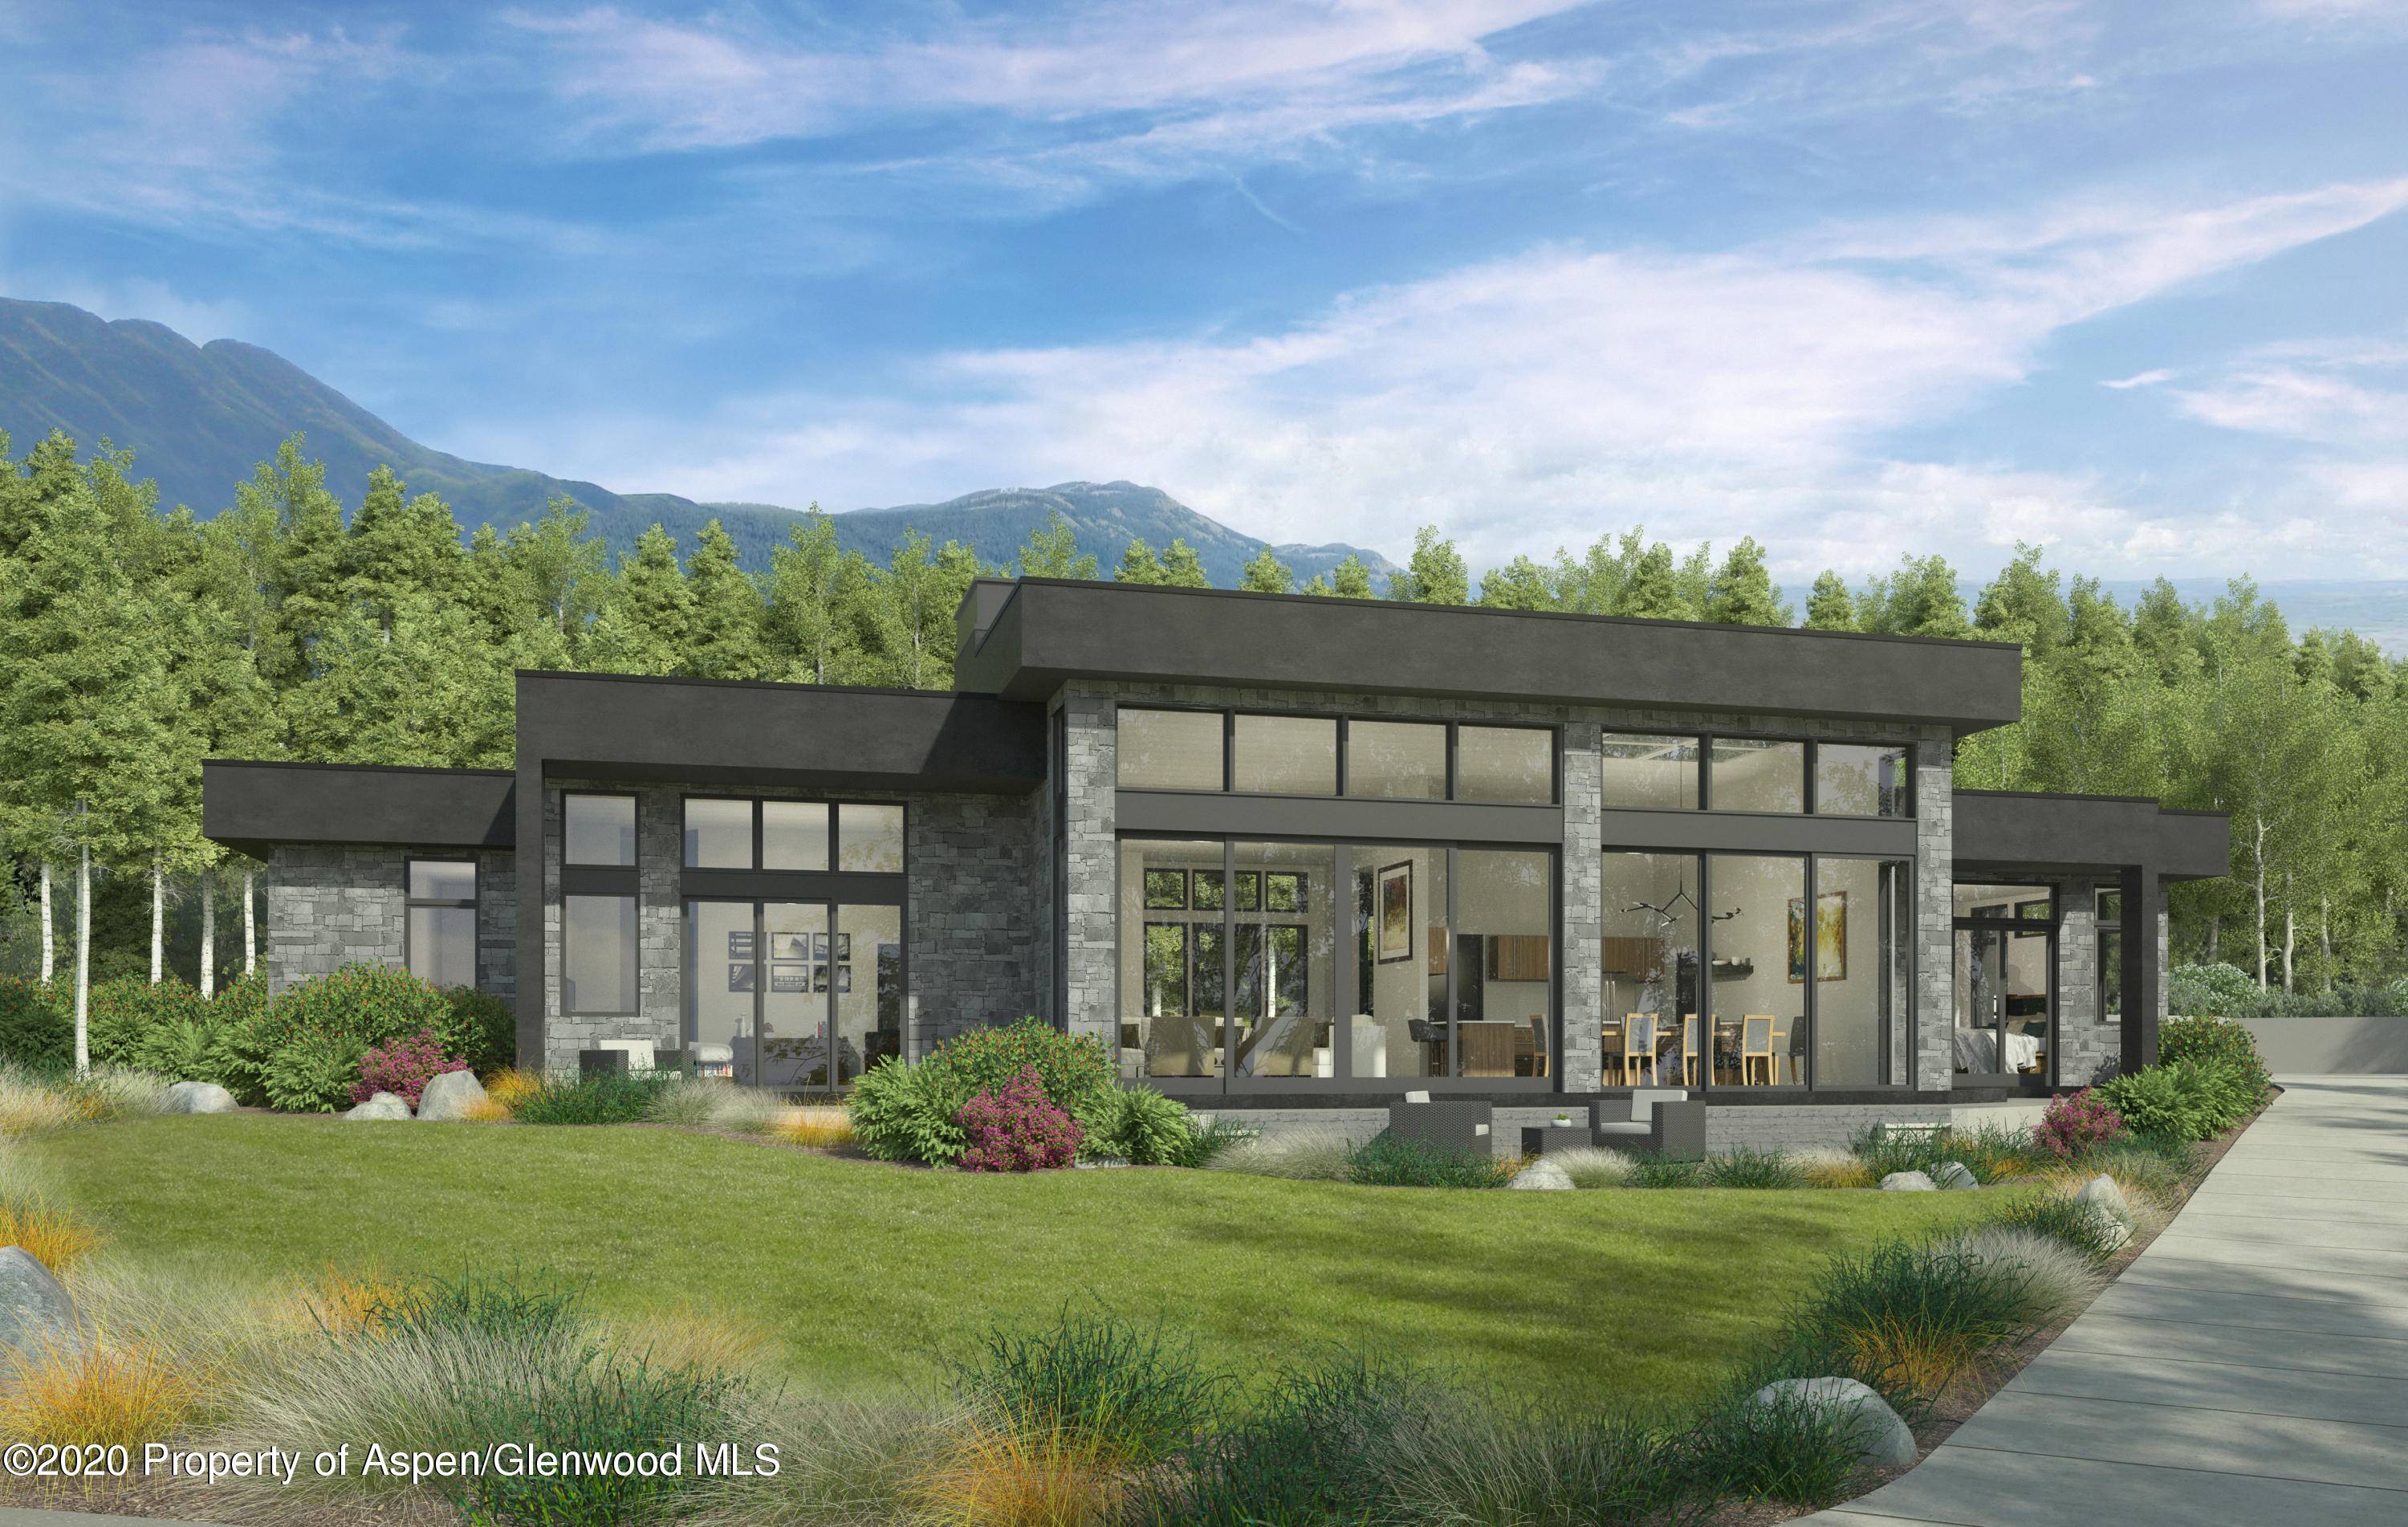 The newest addition to the desirable East Aspen neighborhood of Aspen Grove, the contemporary design and finish of this stylish home is sure to appeal.